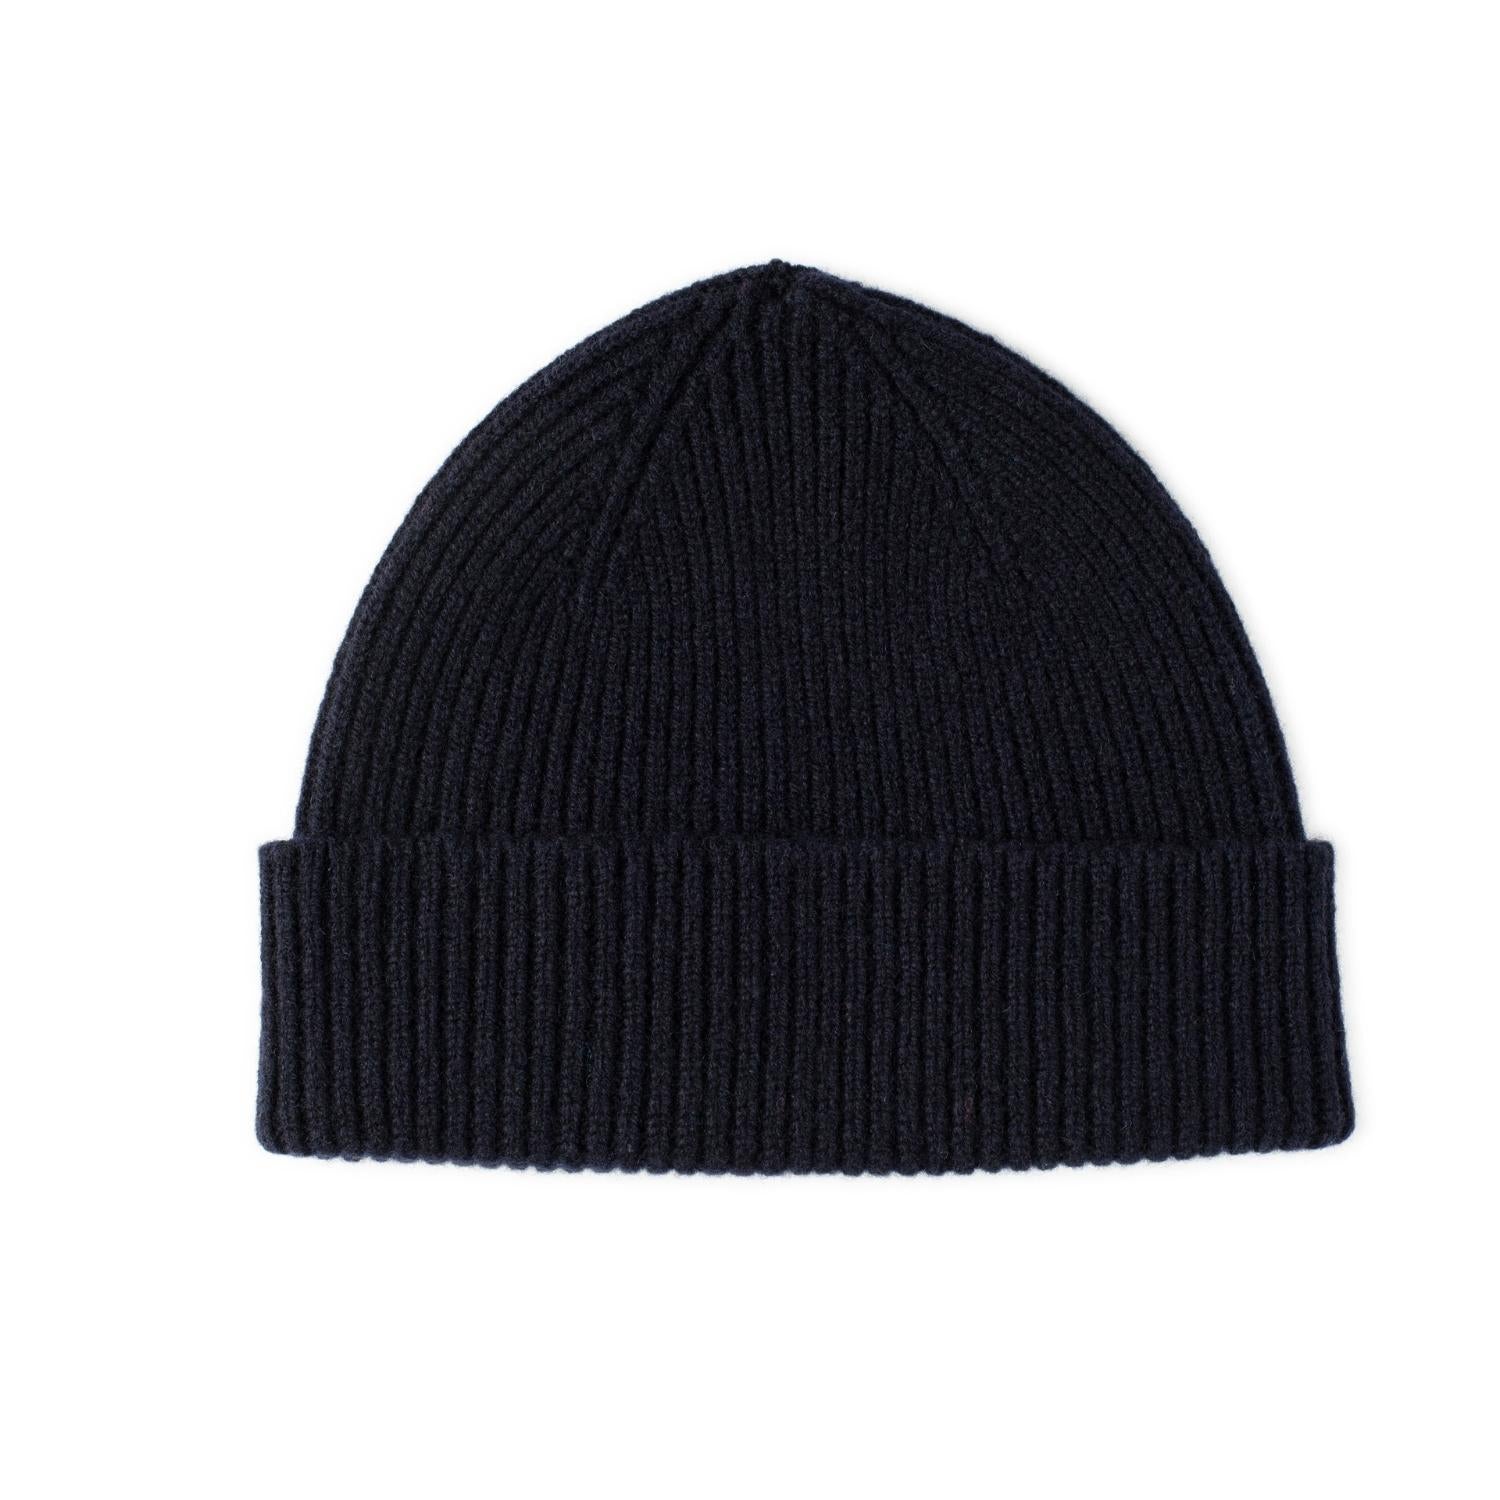 Lambswool beanie - navy ribbed beanie hat for men and women